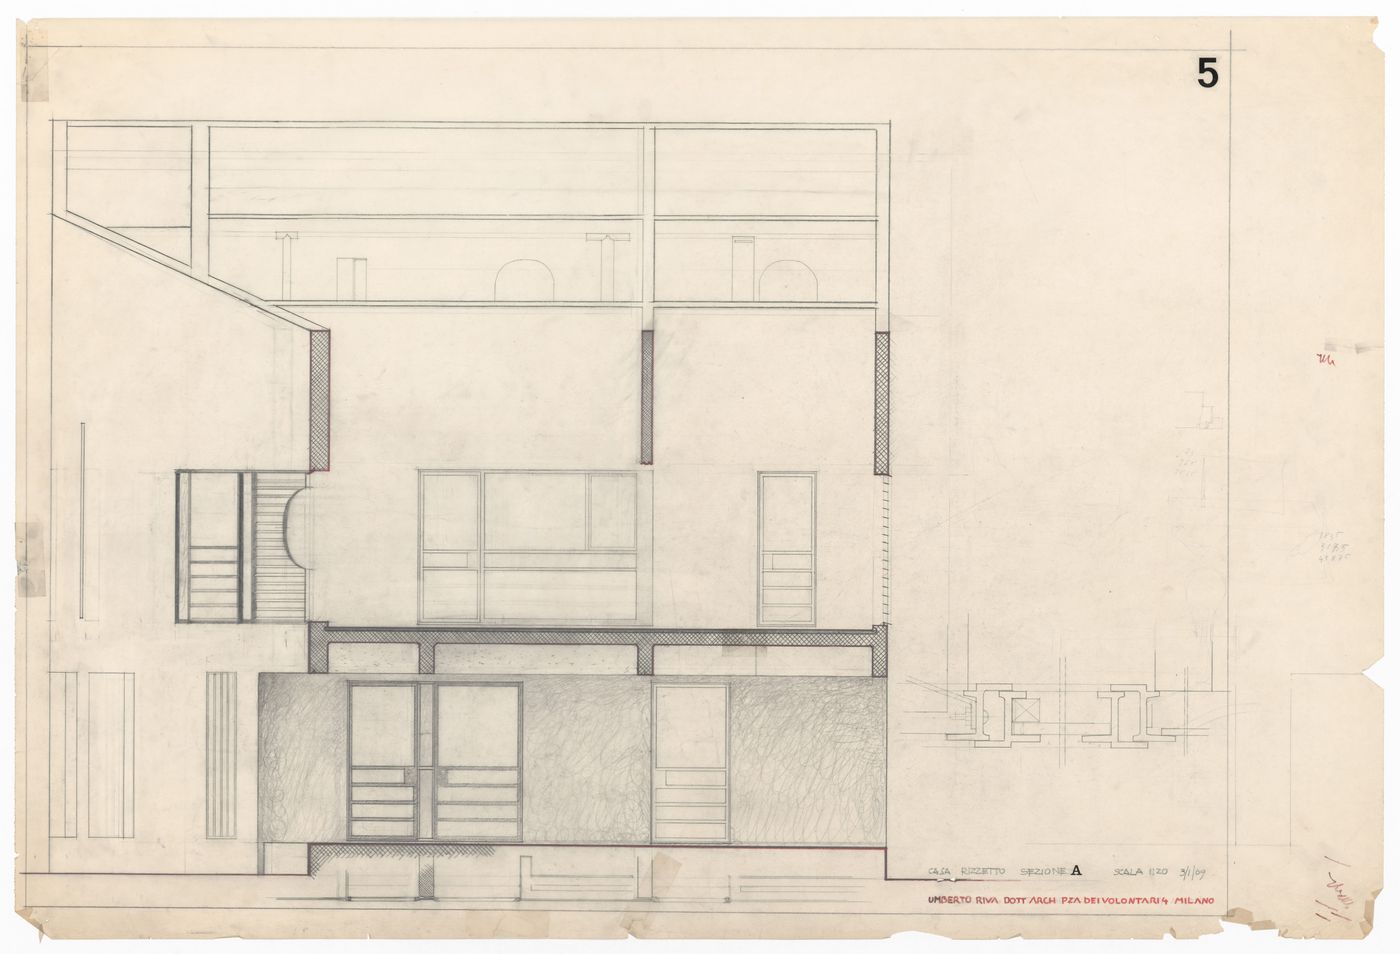 Section for Casa Rizzetto, Caorle, Italy